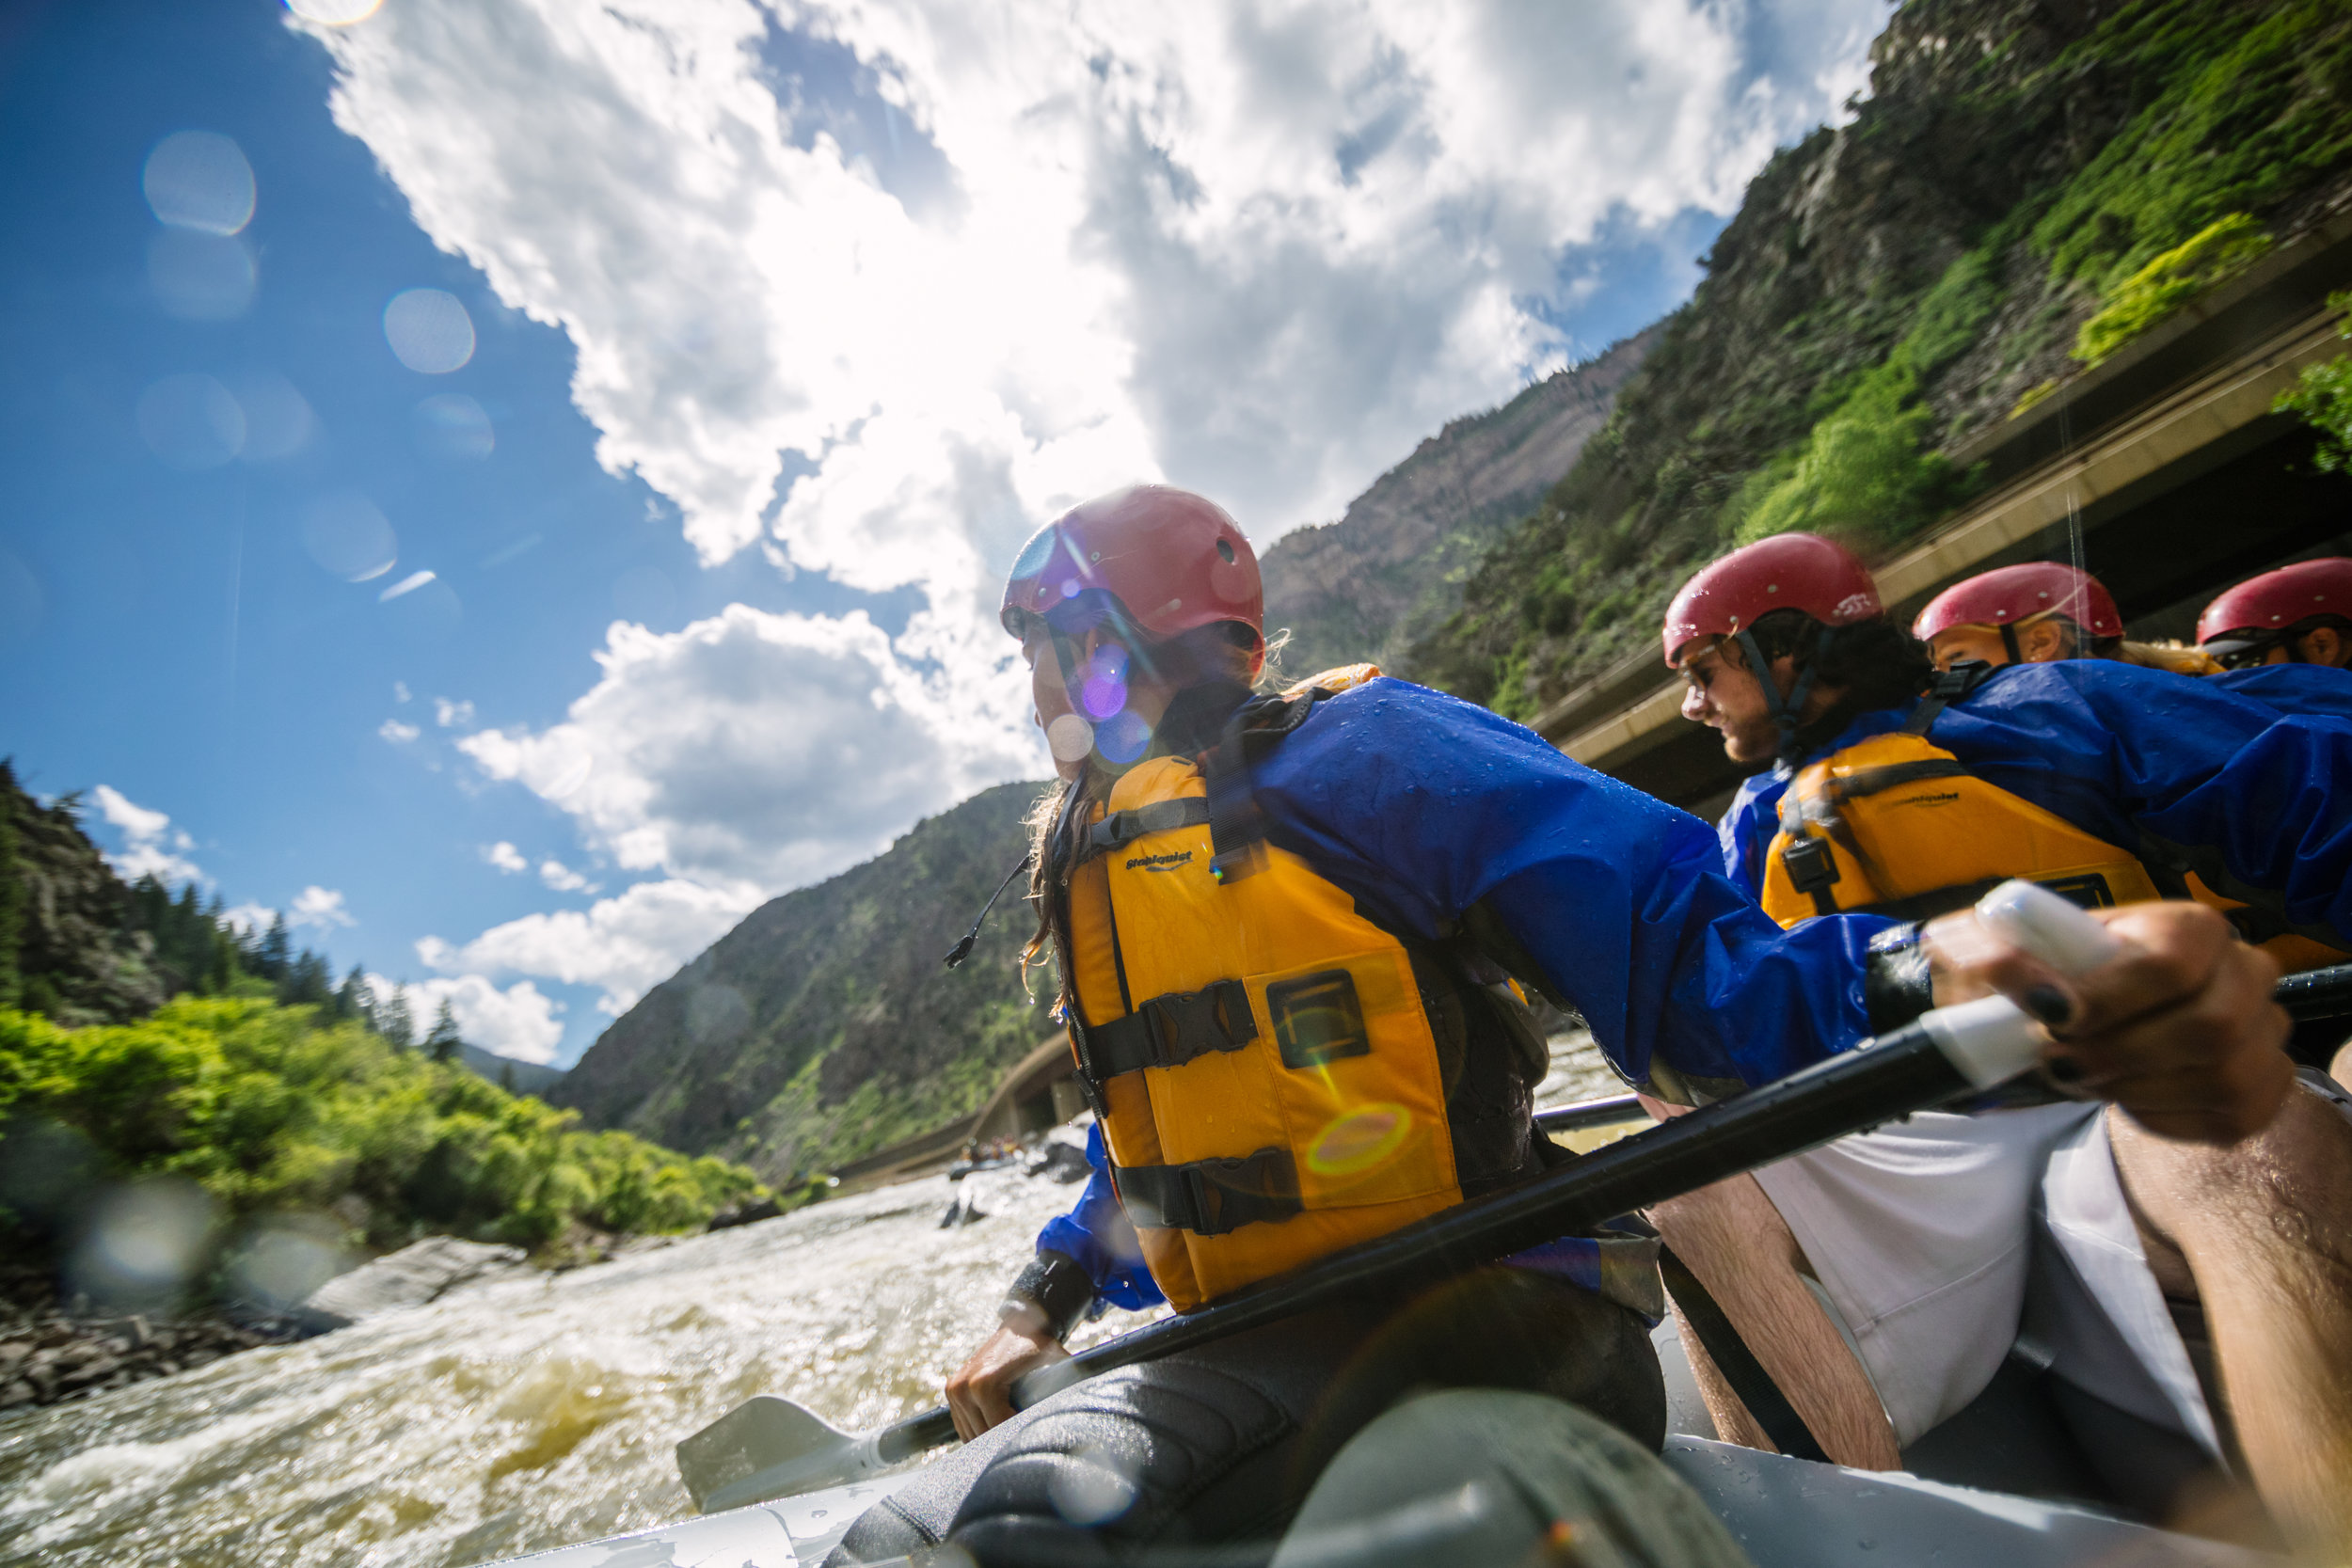 a co whitewater rafting group rafts down a river during the day